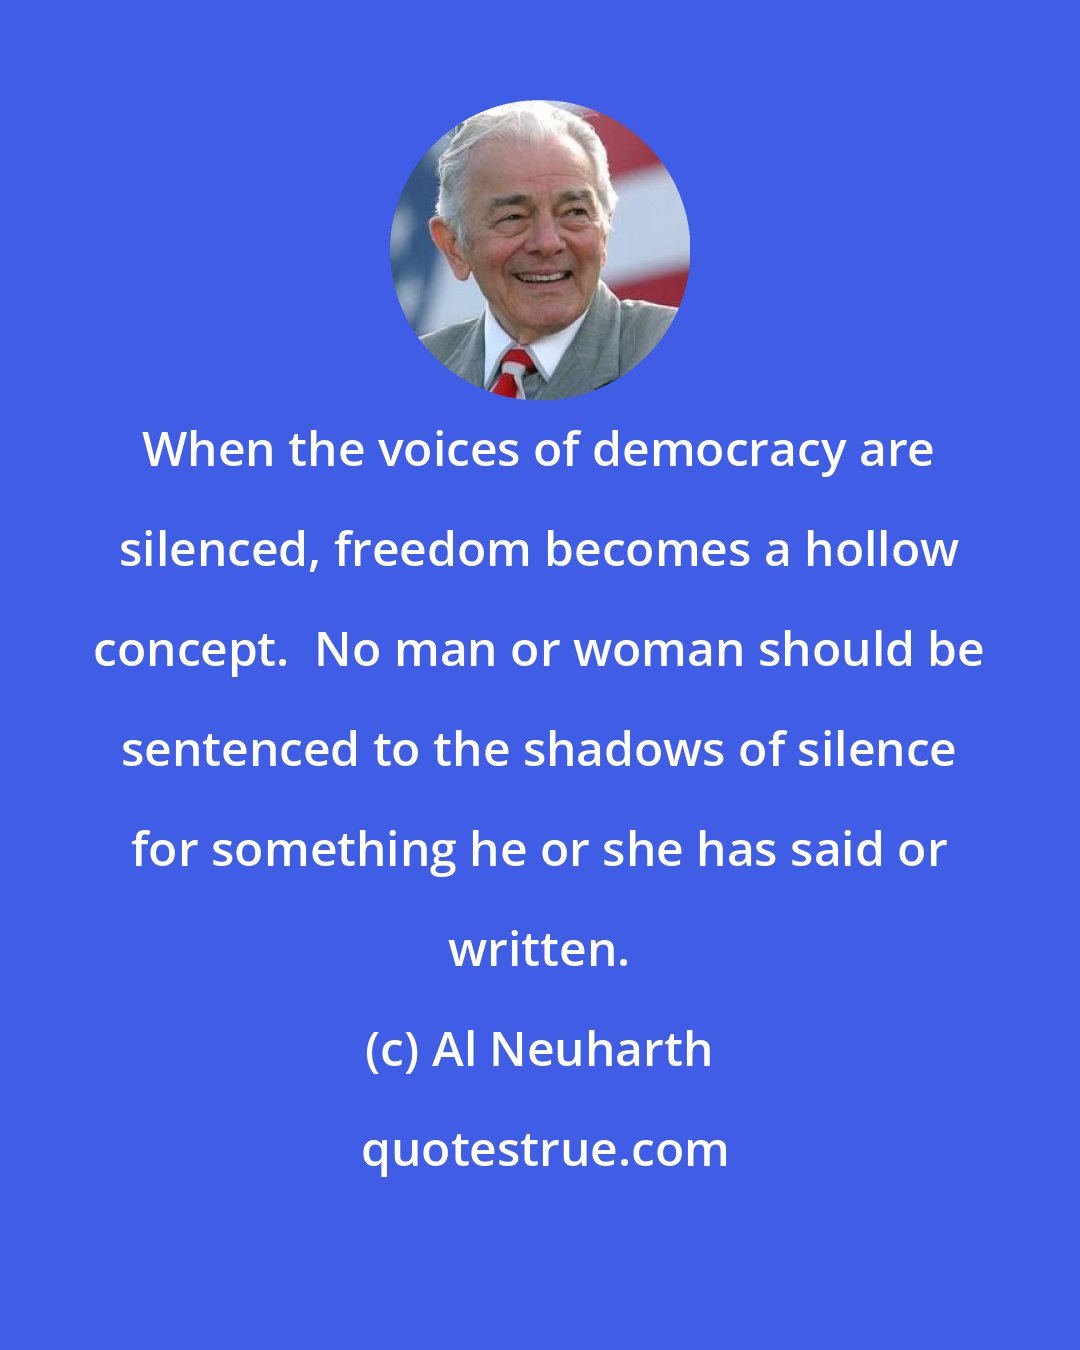 Al Neuharth: When the voices of democracy are silenced, freedom becomes a hollow concept.  No man or woman should be sentenced to the shadows of silence for something he or she has said or written.